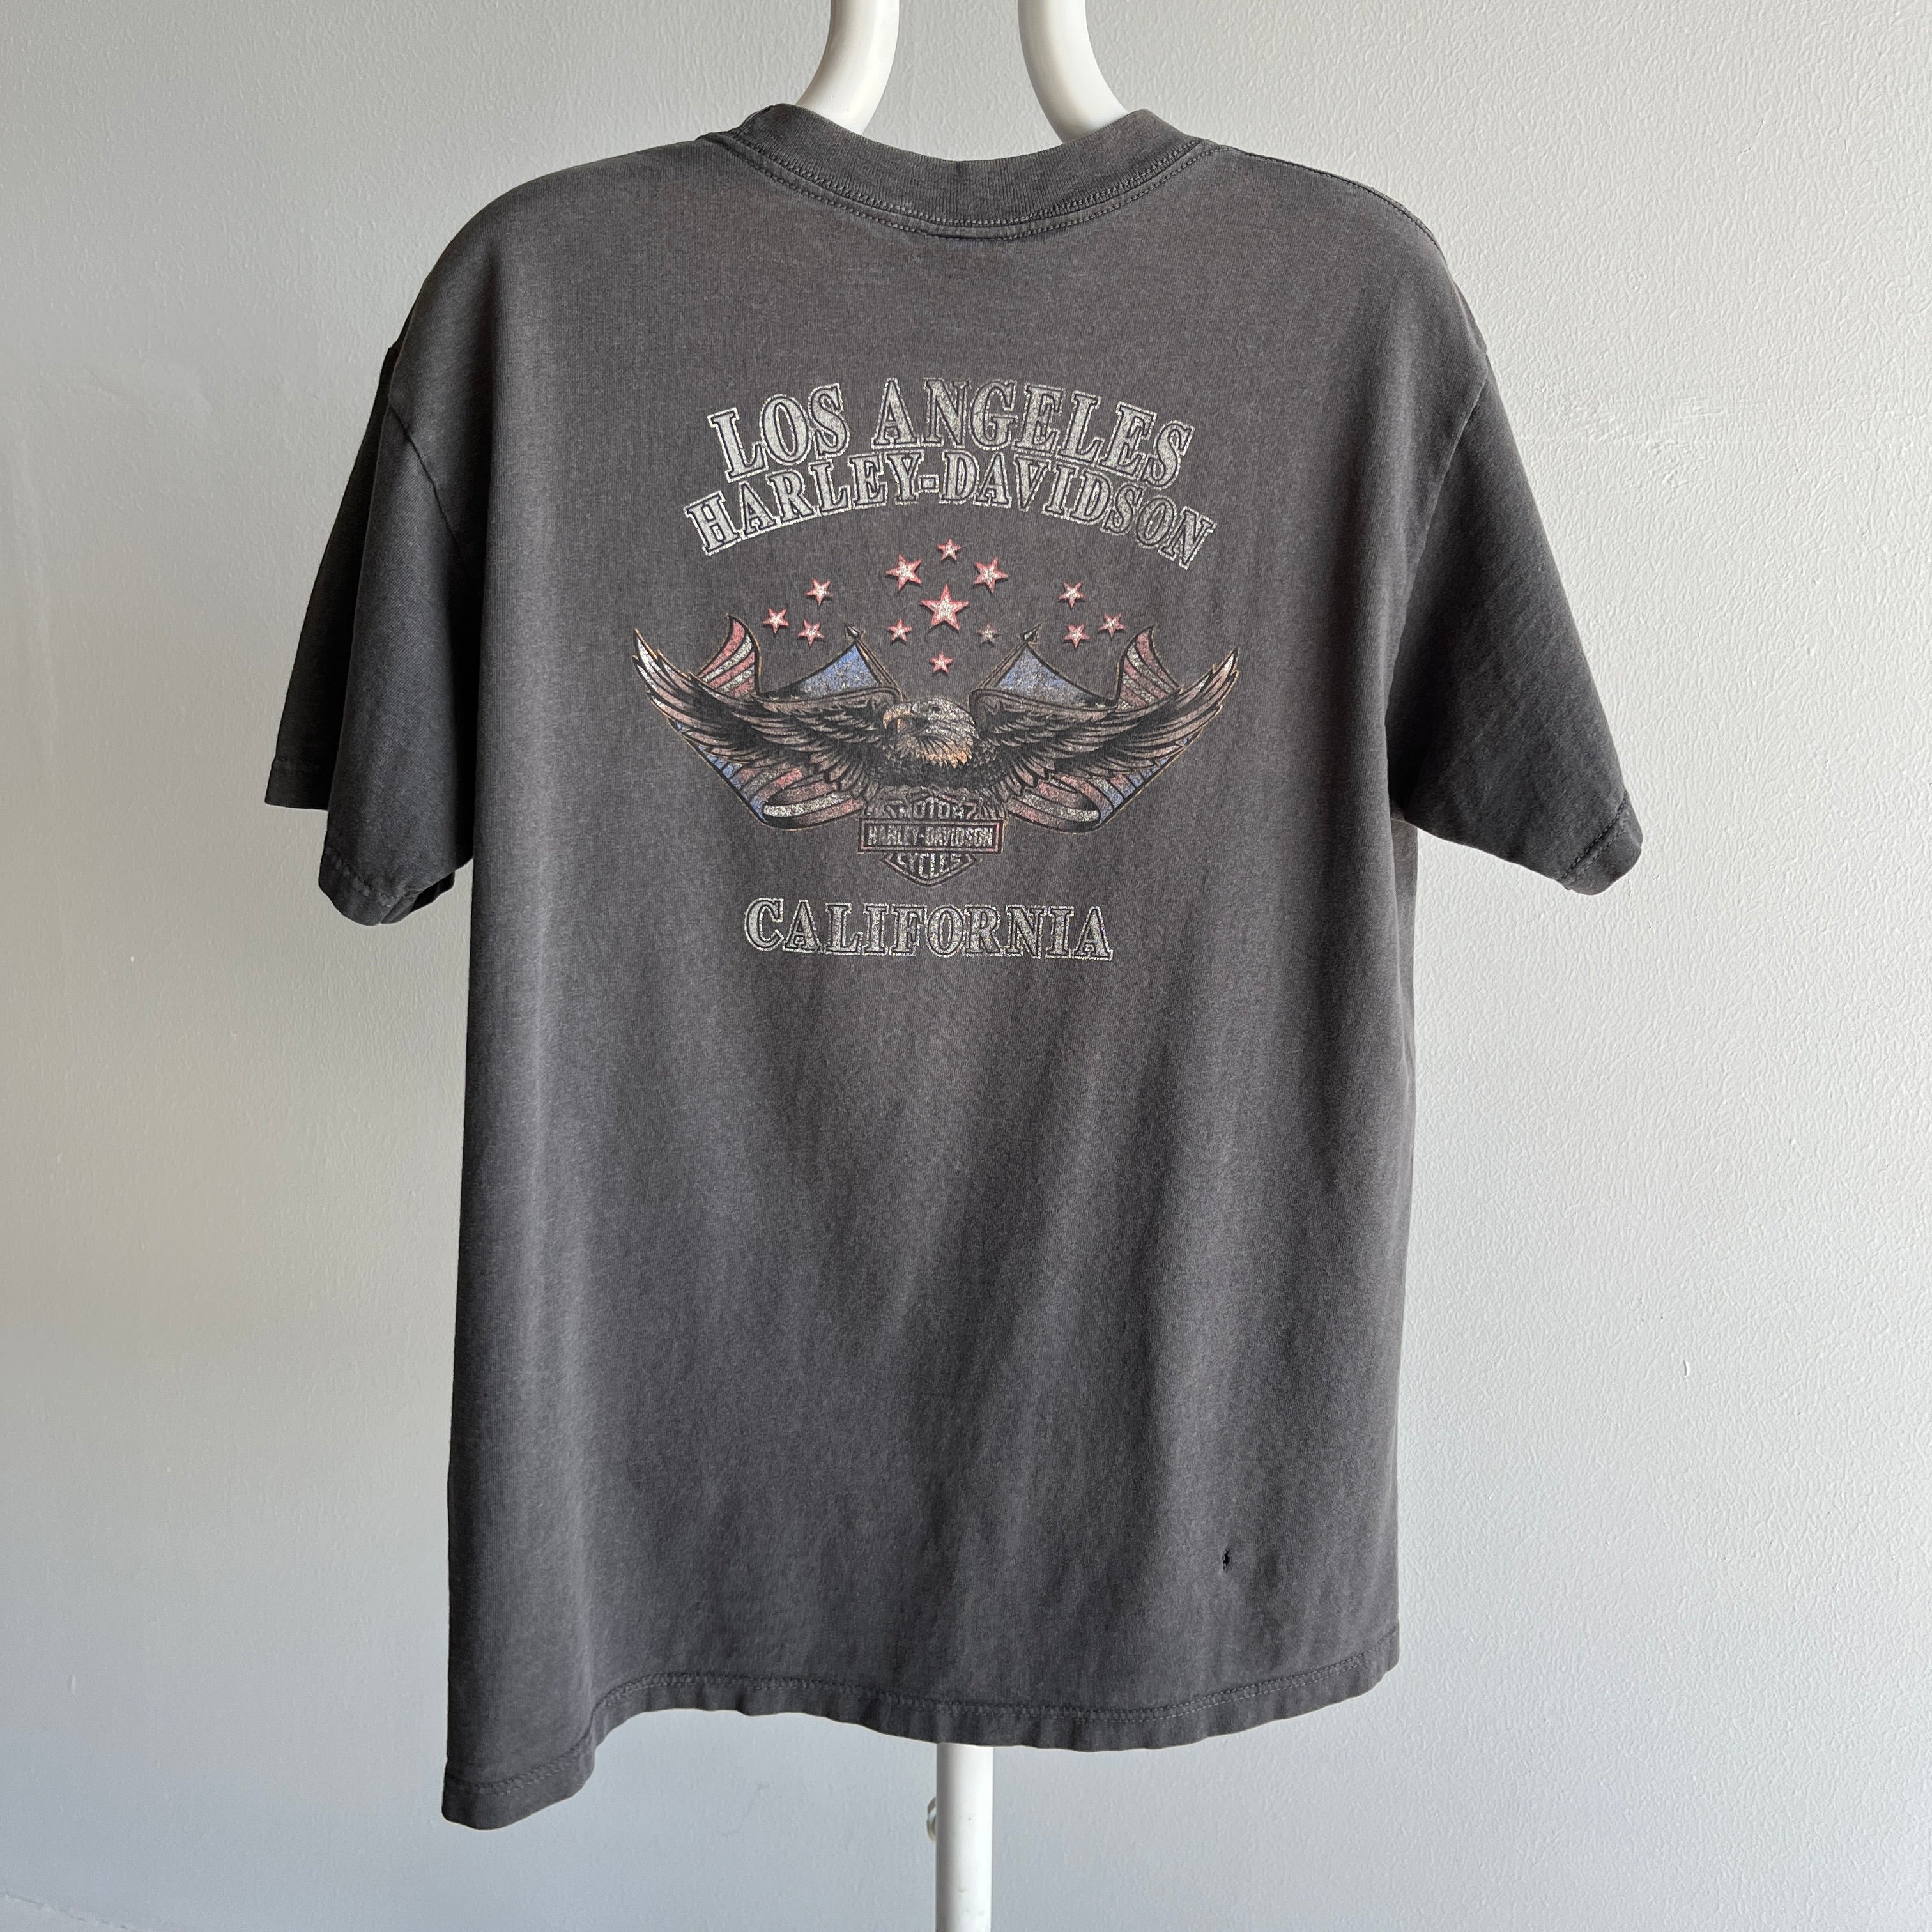 Not That Old - Los Angeles Harley - T-Shirt